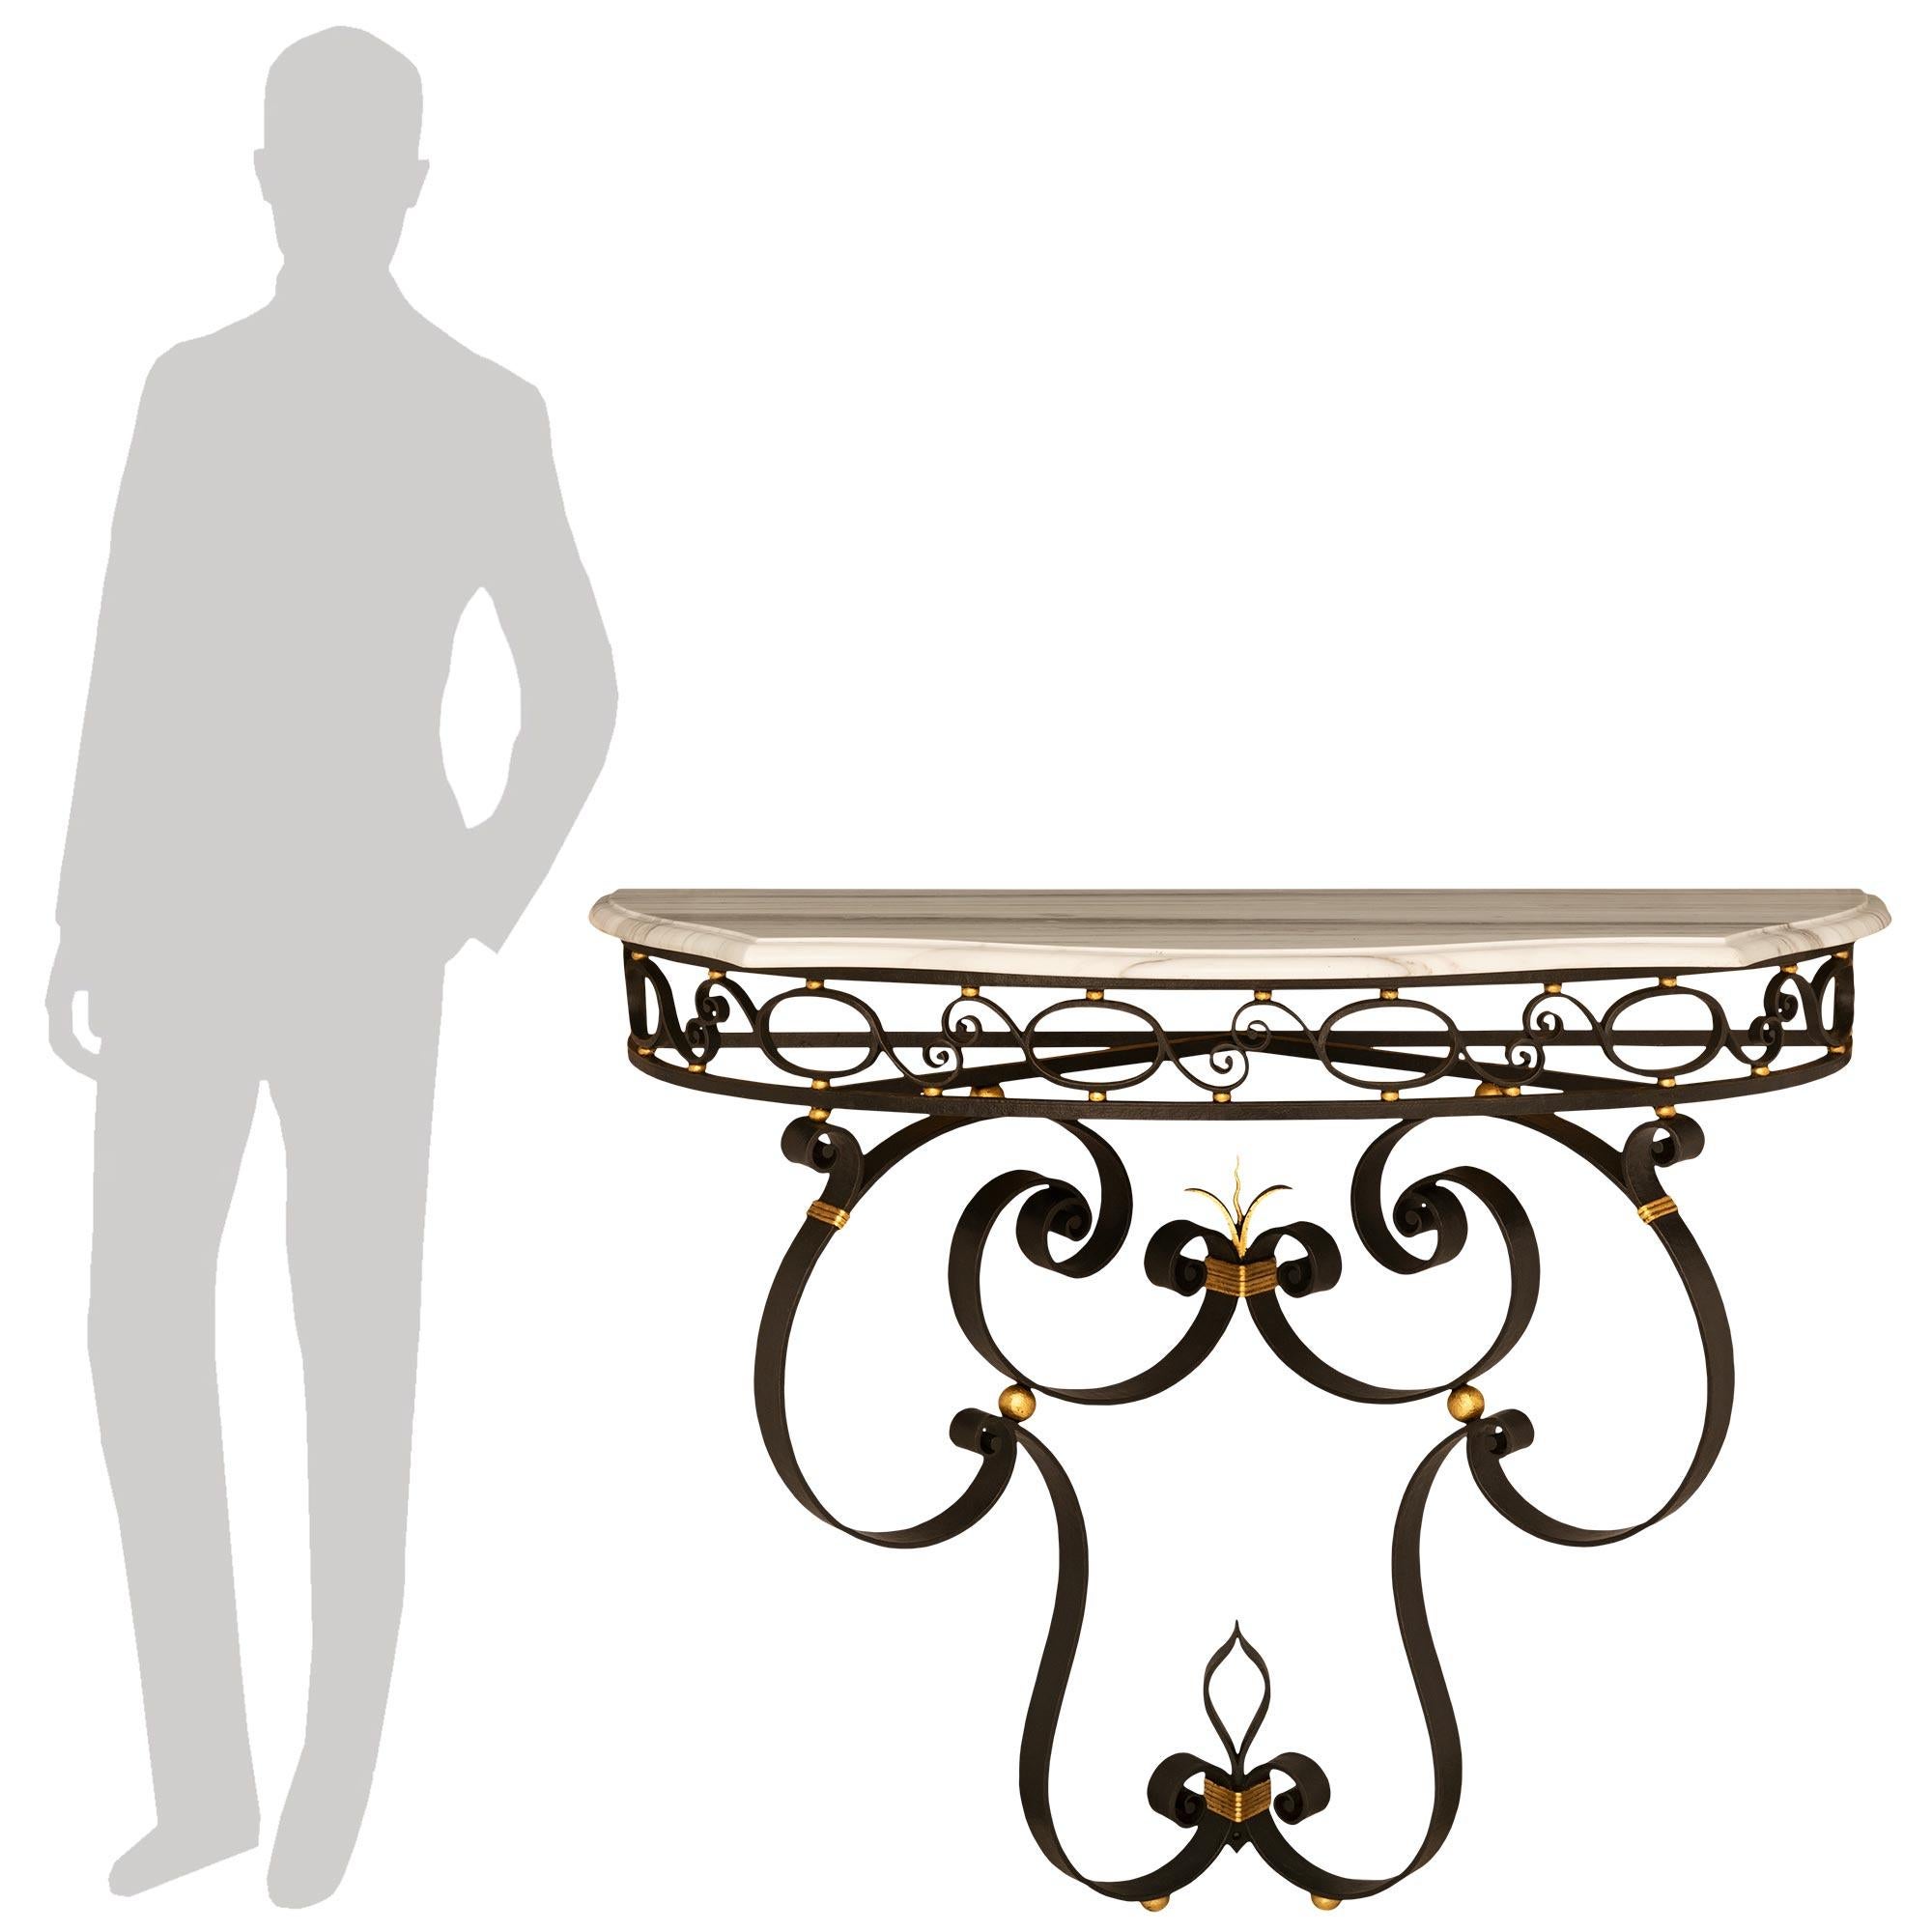 An elegant French turn of the century Wrought Iron, Gilt Metal and marble console.